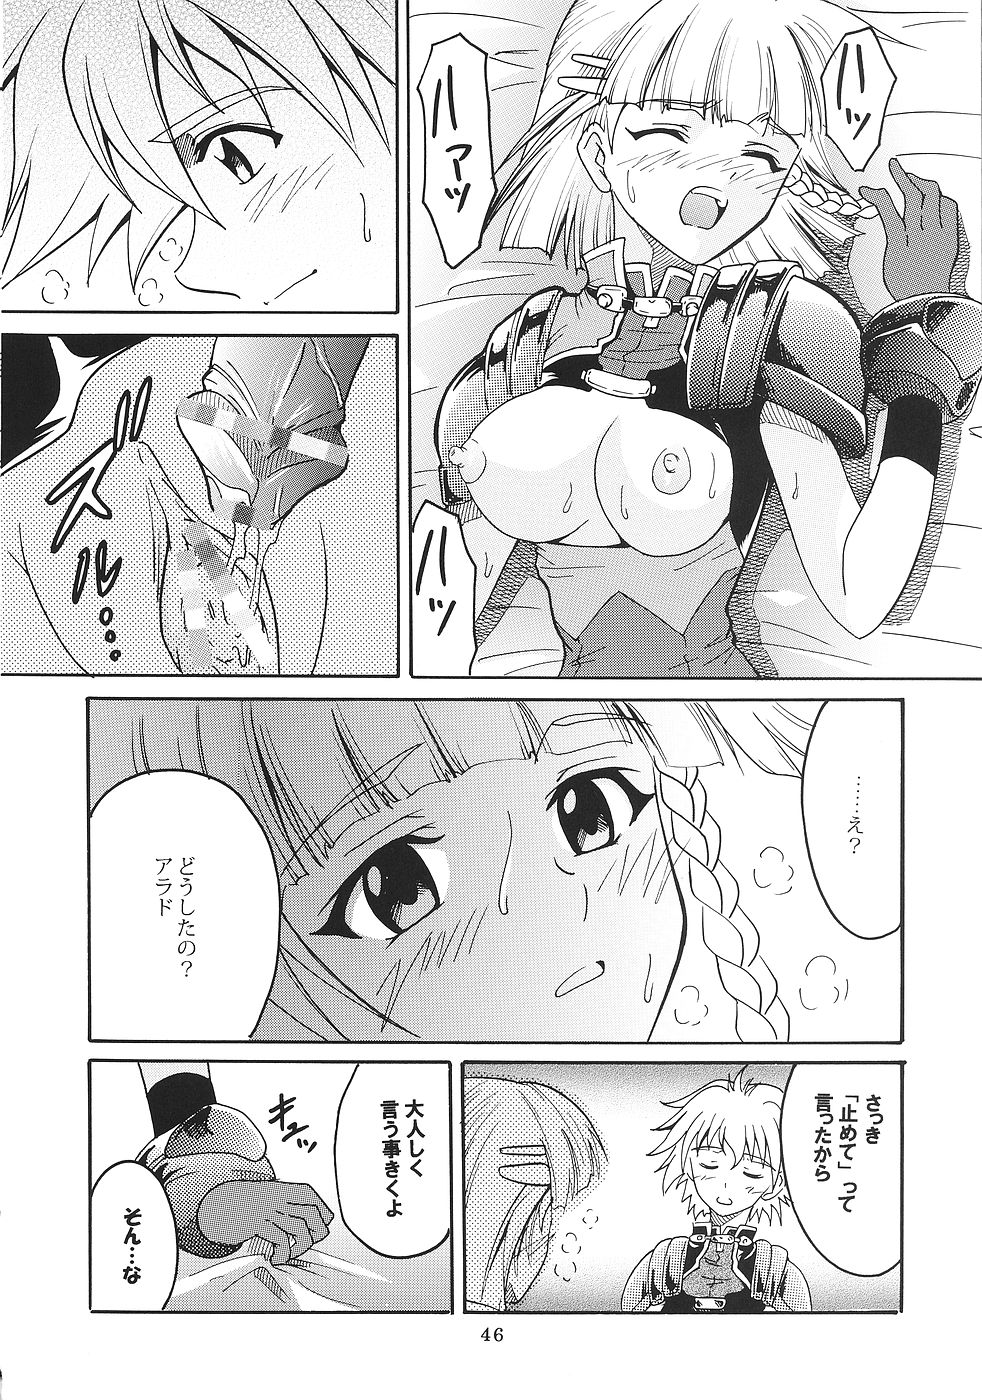 [St. Rio (Kitty)] SUPER COSMIC BREED (Super Robot Wars) page 47 full